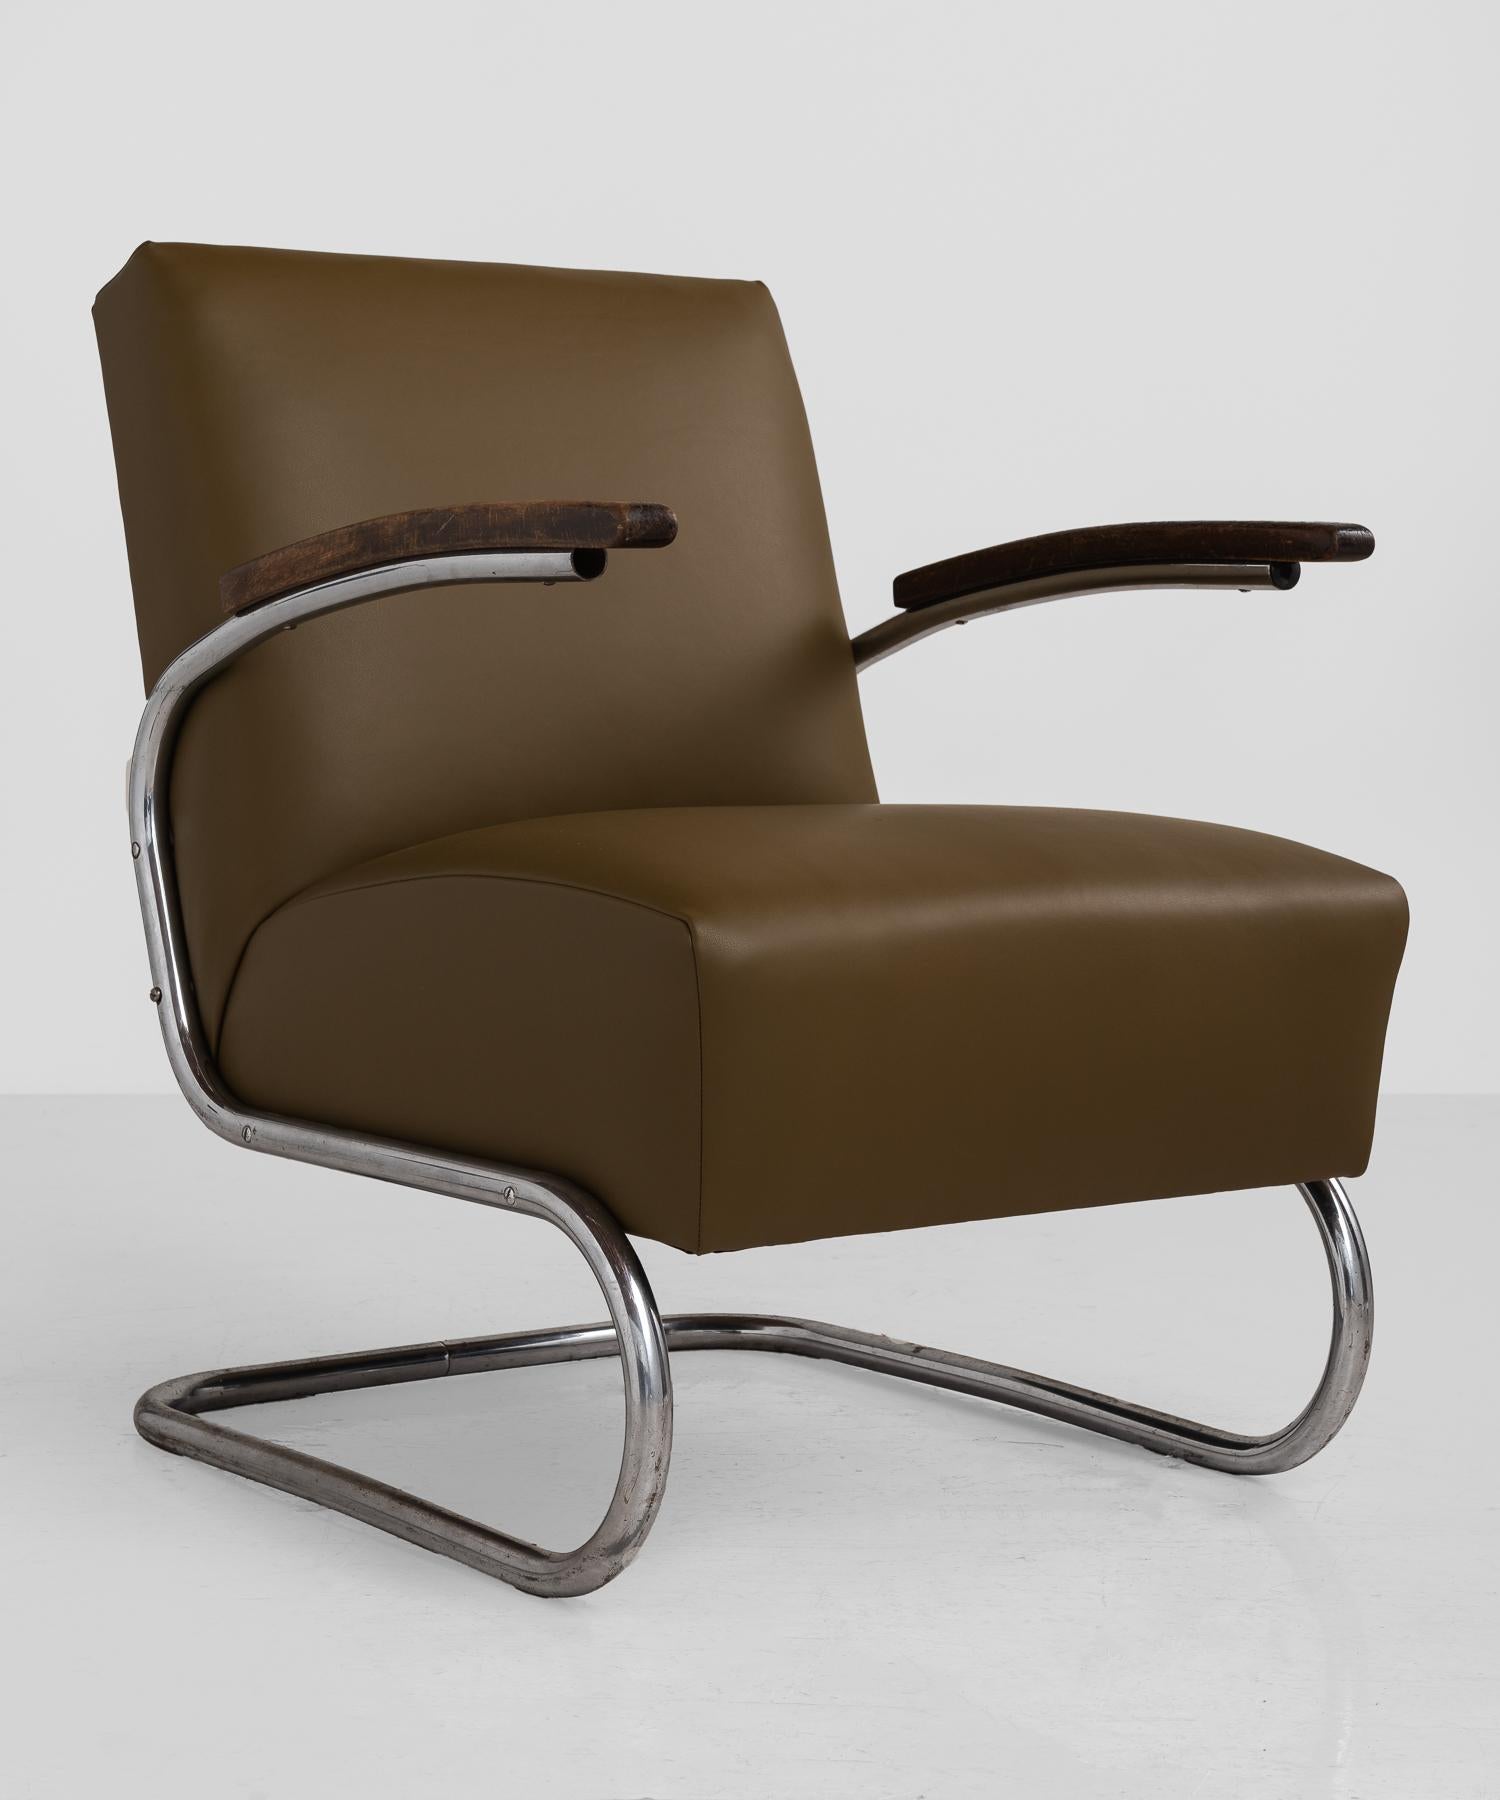 Thonet Modern Leather Armchair, Germany circa 1930

Model SS41 Thonet armchair, newly reupholstered in Woodrose leather by Maharam. Cantilever frame in chromed steel with wooden armrests.

27.5